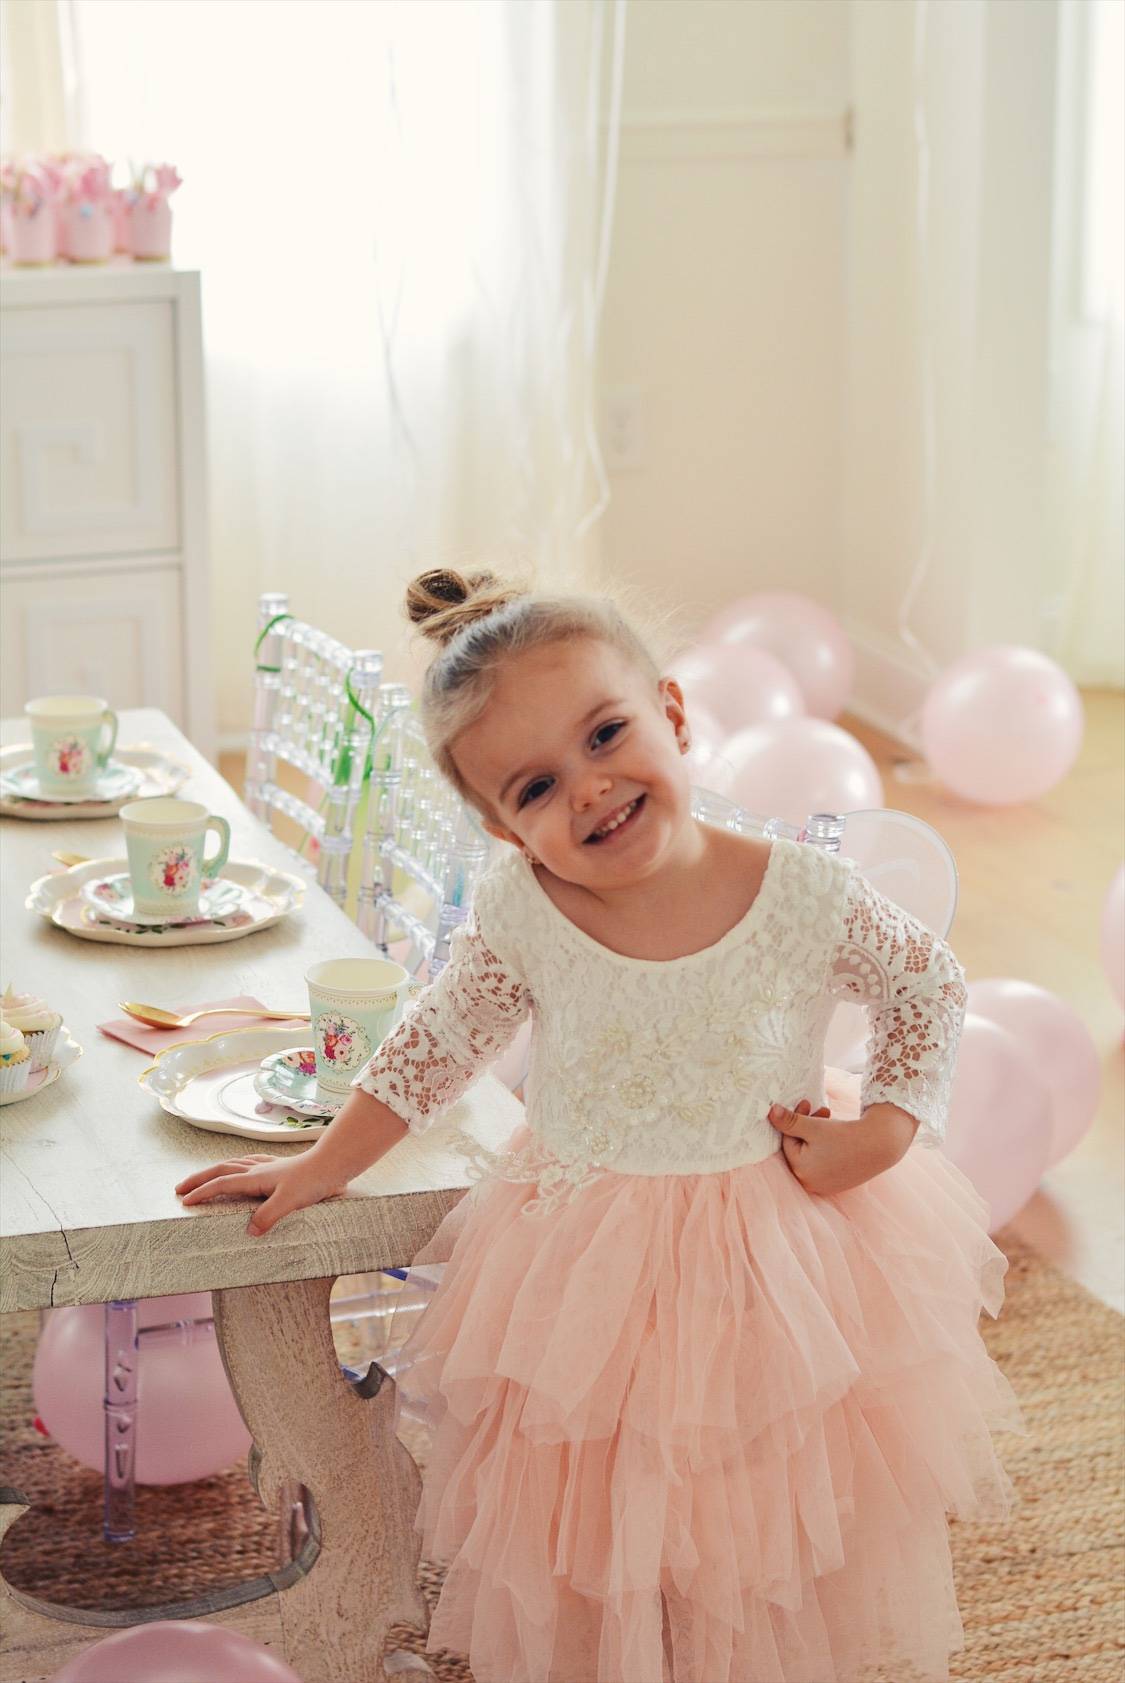 Princess Tea Party: Birthday Party Ideas for a 3 Year Old - The Pink Dream